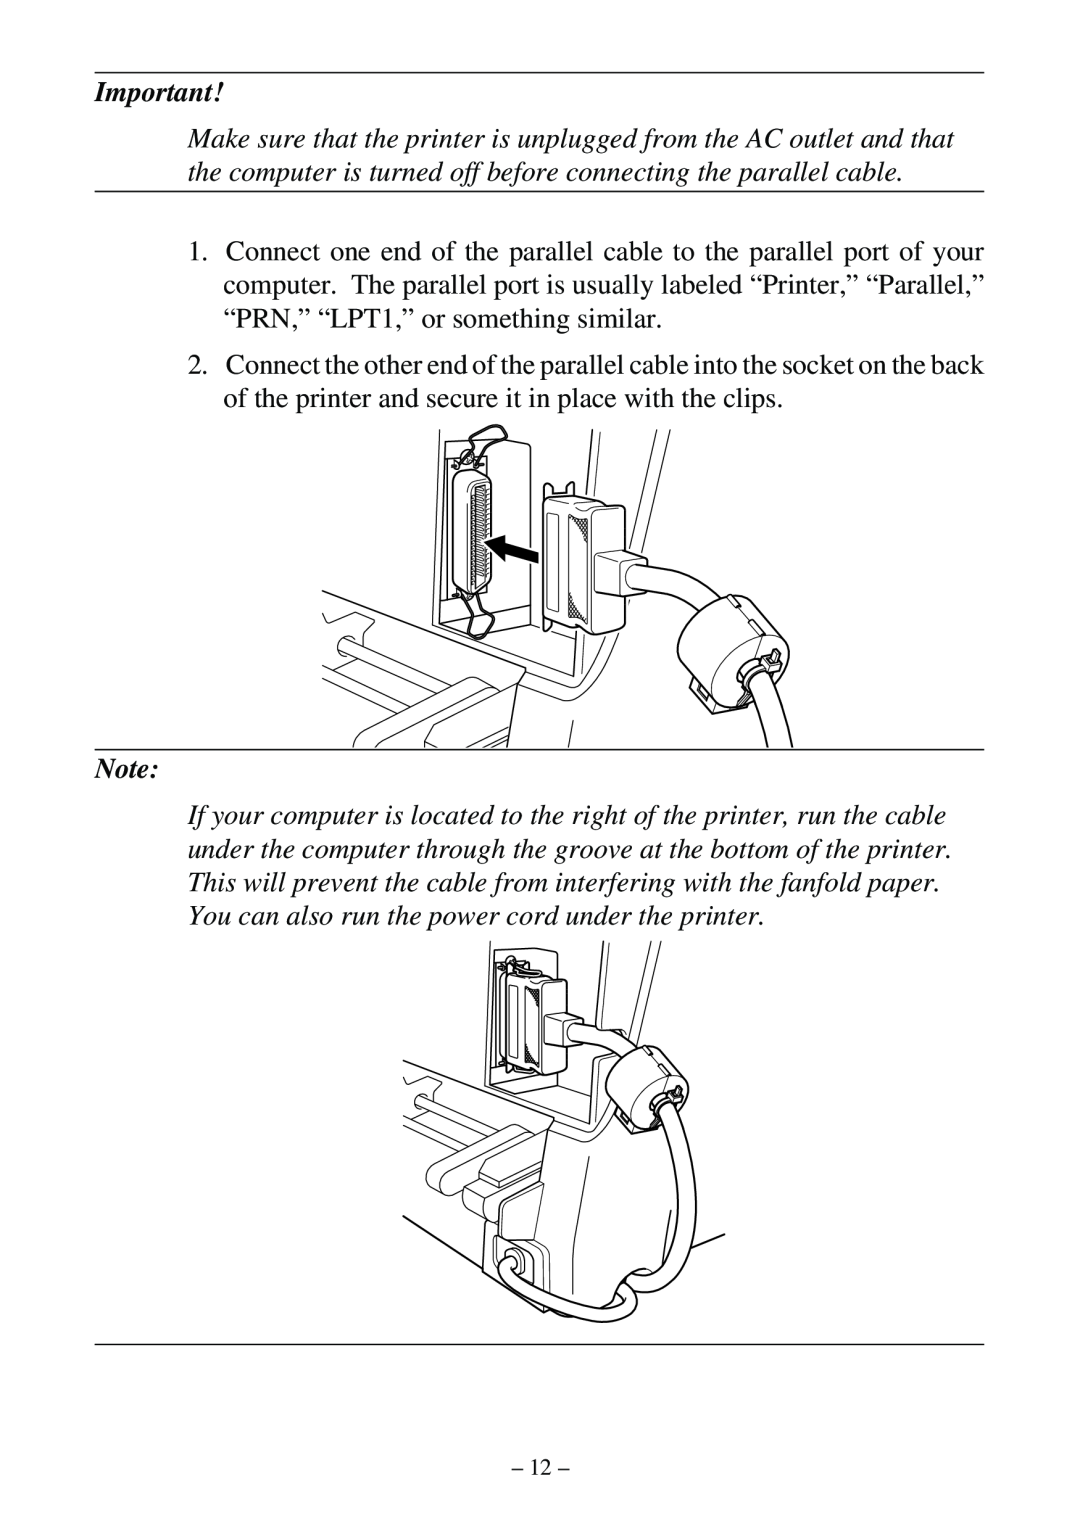 Star Micronics LC-500 user manual You can also run the power cord under the printer 